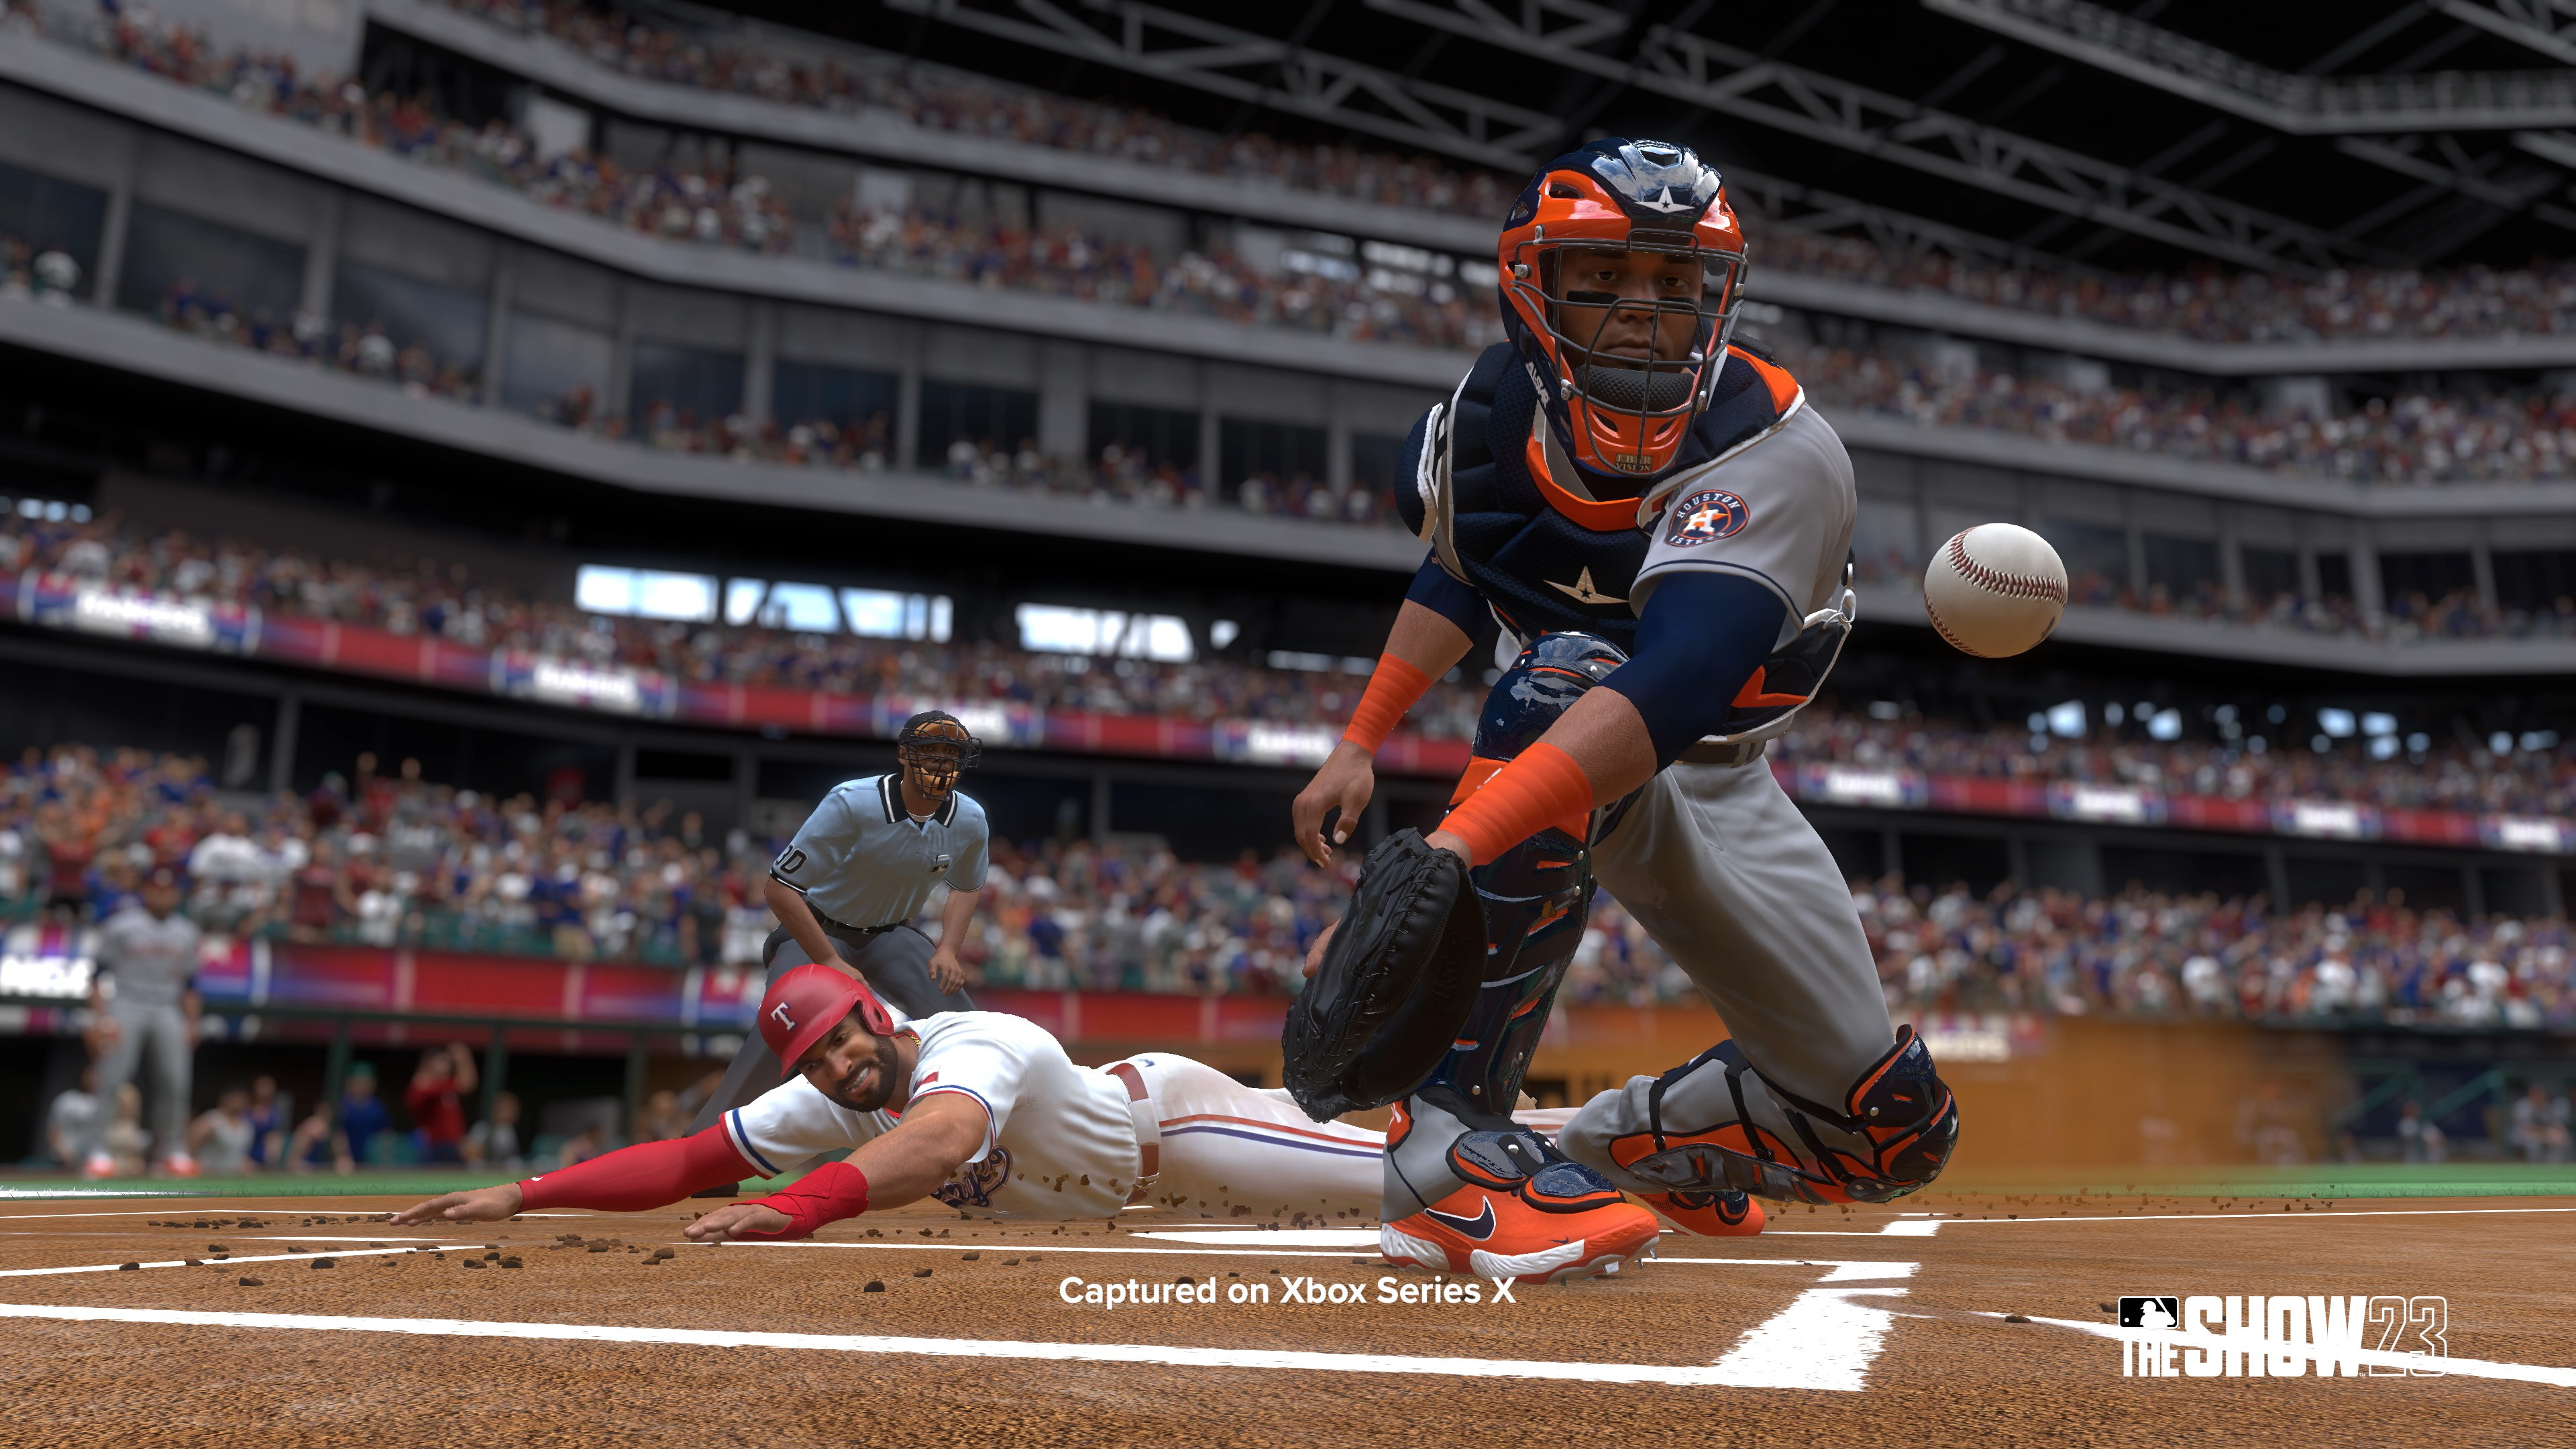 MLB The Show 23 PlayStation 5 Account Pixelpuffin.net Activation Link